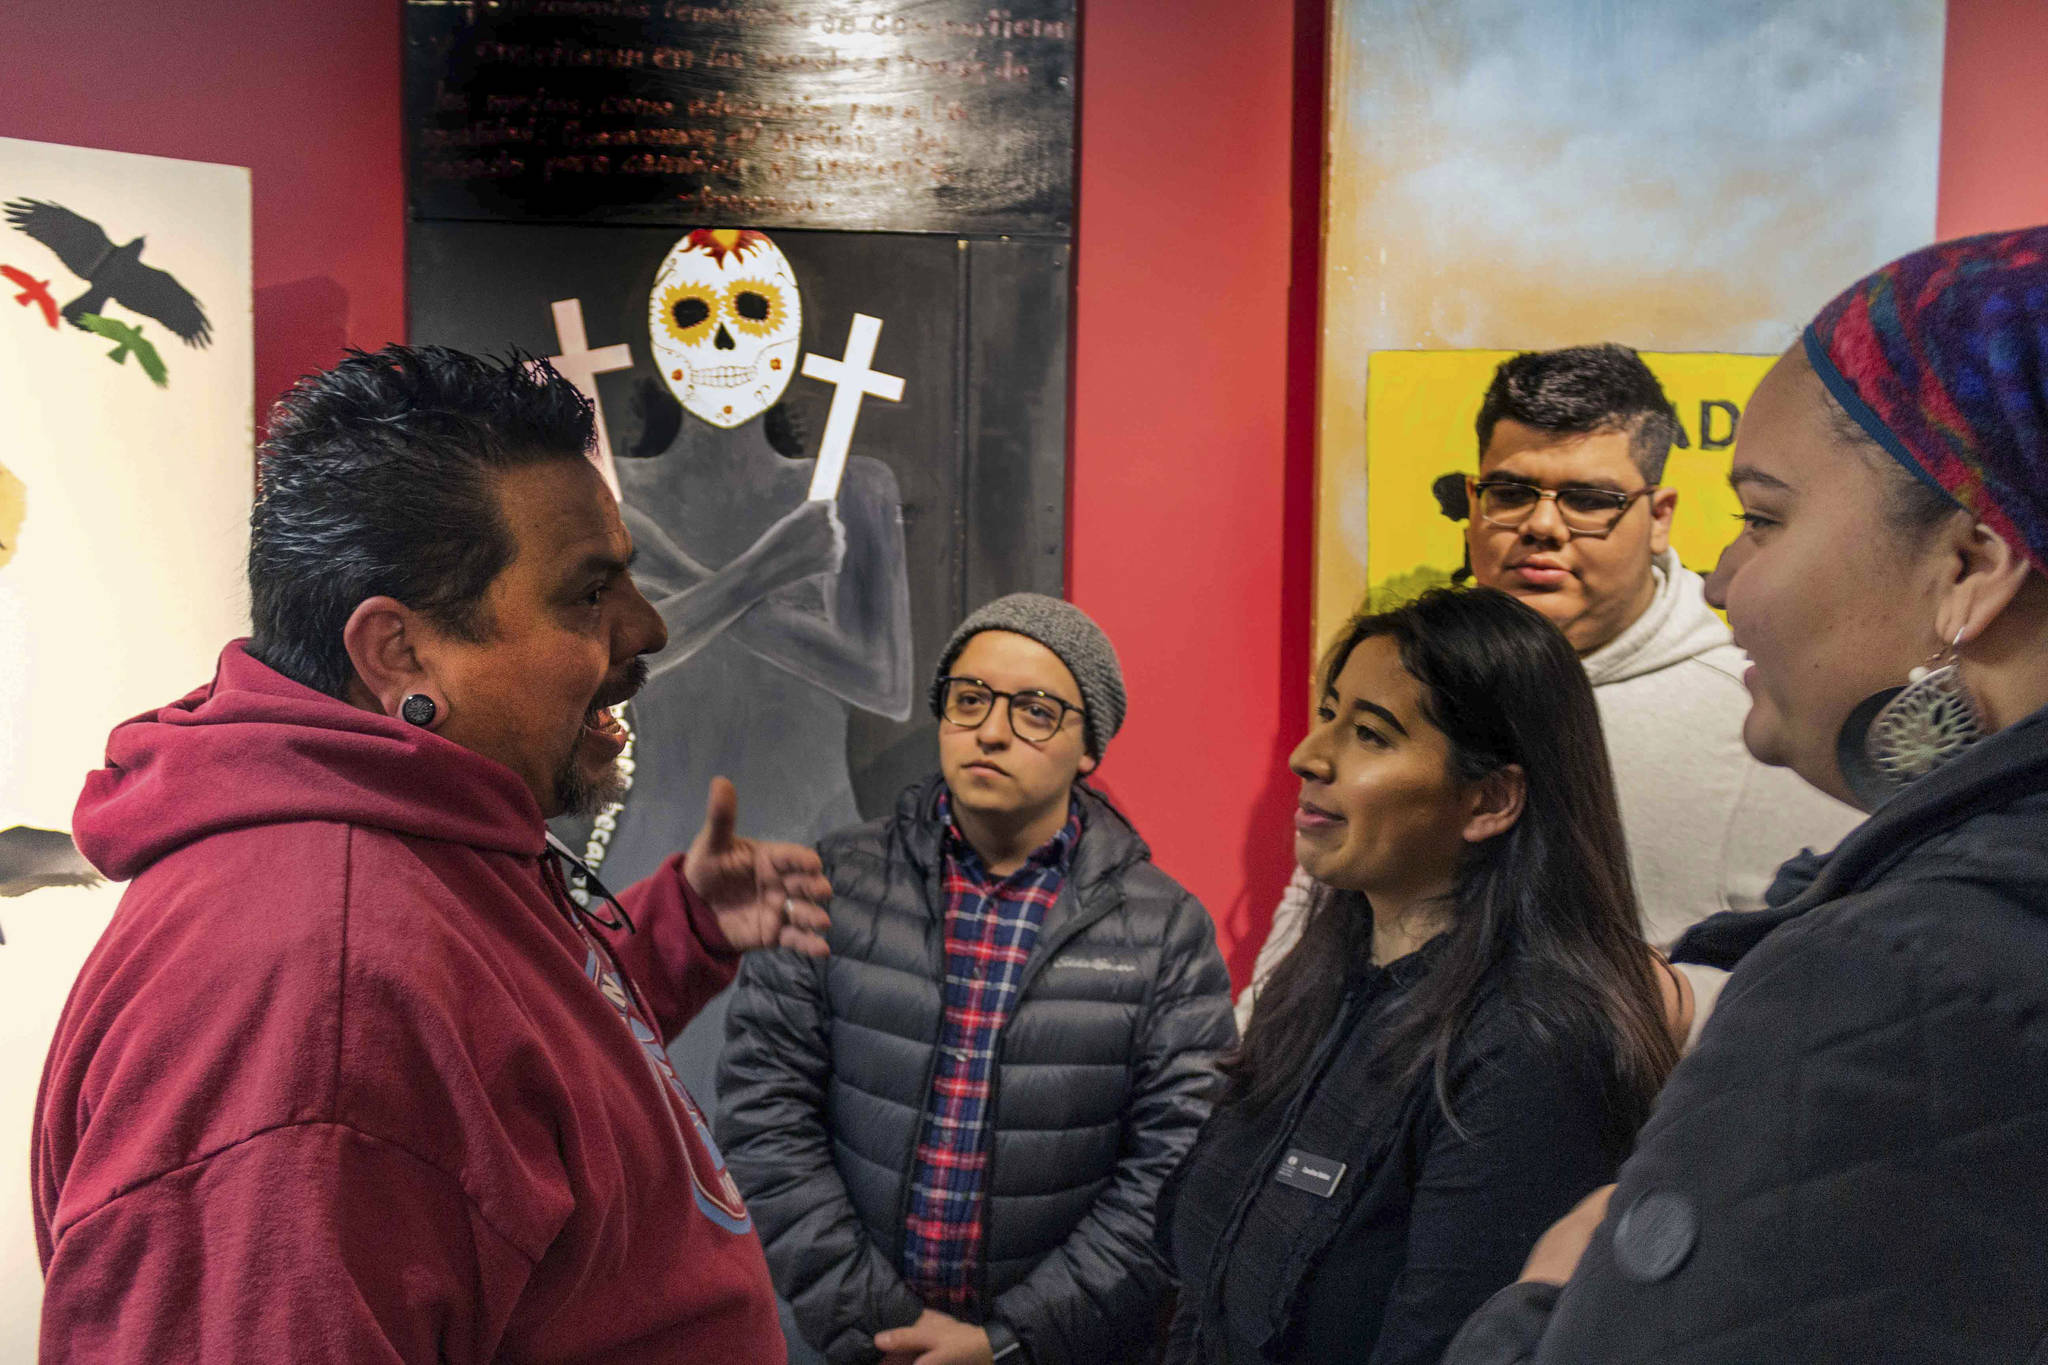 Photo courtesy of Centro Cultural Mexicano                                Claudio Pérez speaks with a group of students at the opening reception for the “Border Doors” exhibit at Centro Cultural Mexicano.